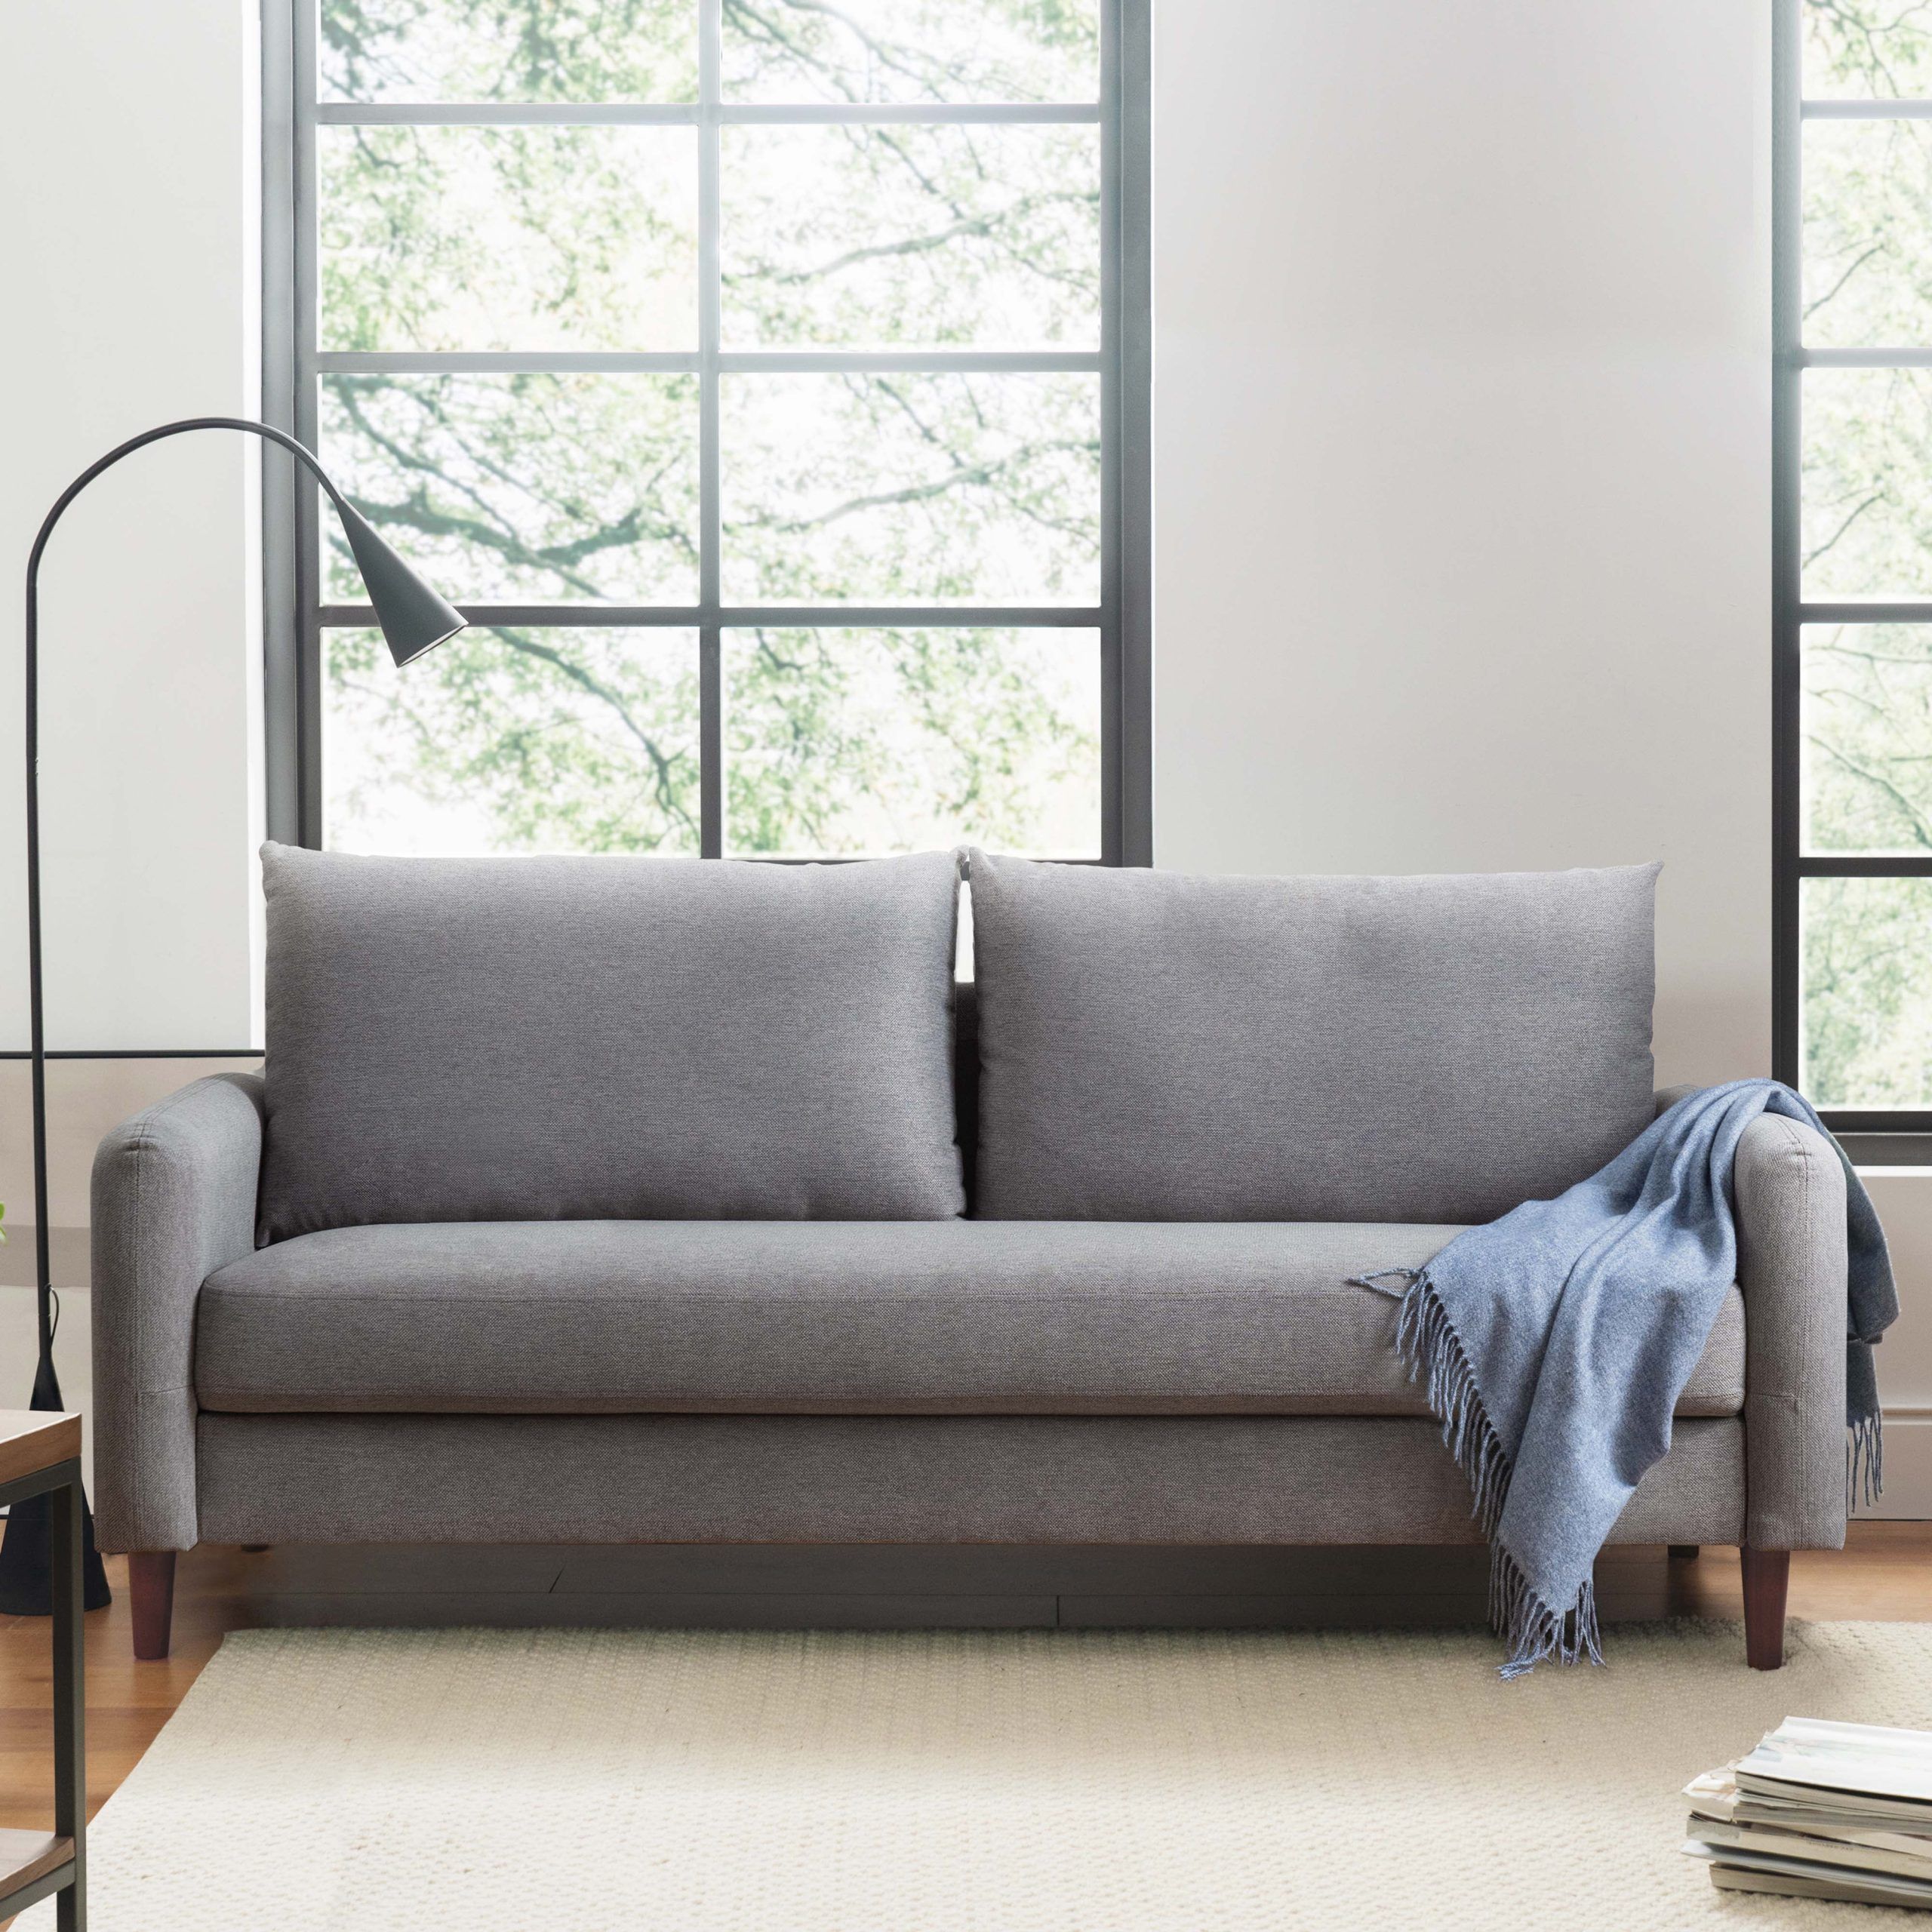 Mellow Mae Mid Century Modern Sofa With Curved Arms, Light Grey –  Walmart Throughout Sofas With Curved Arms (View 8 of 15)